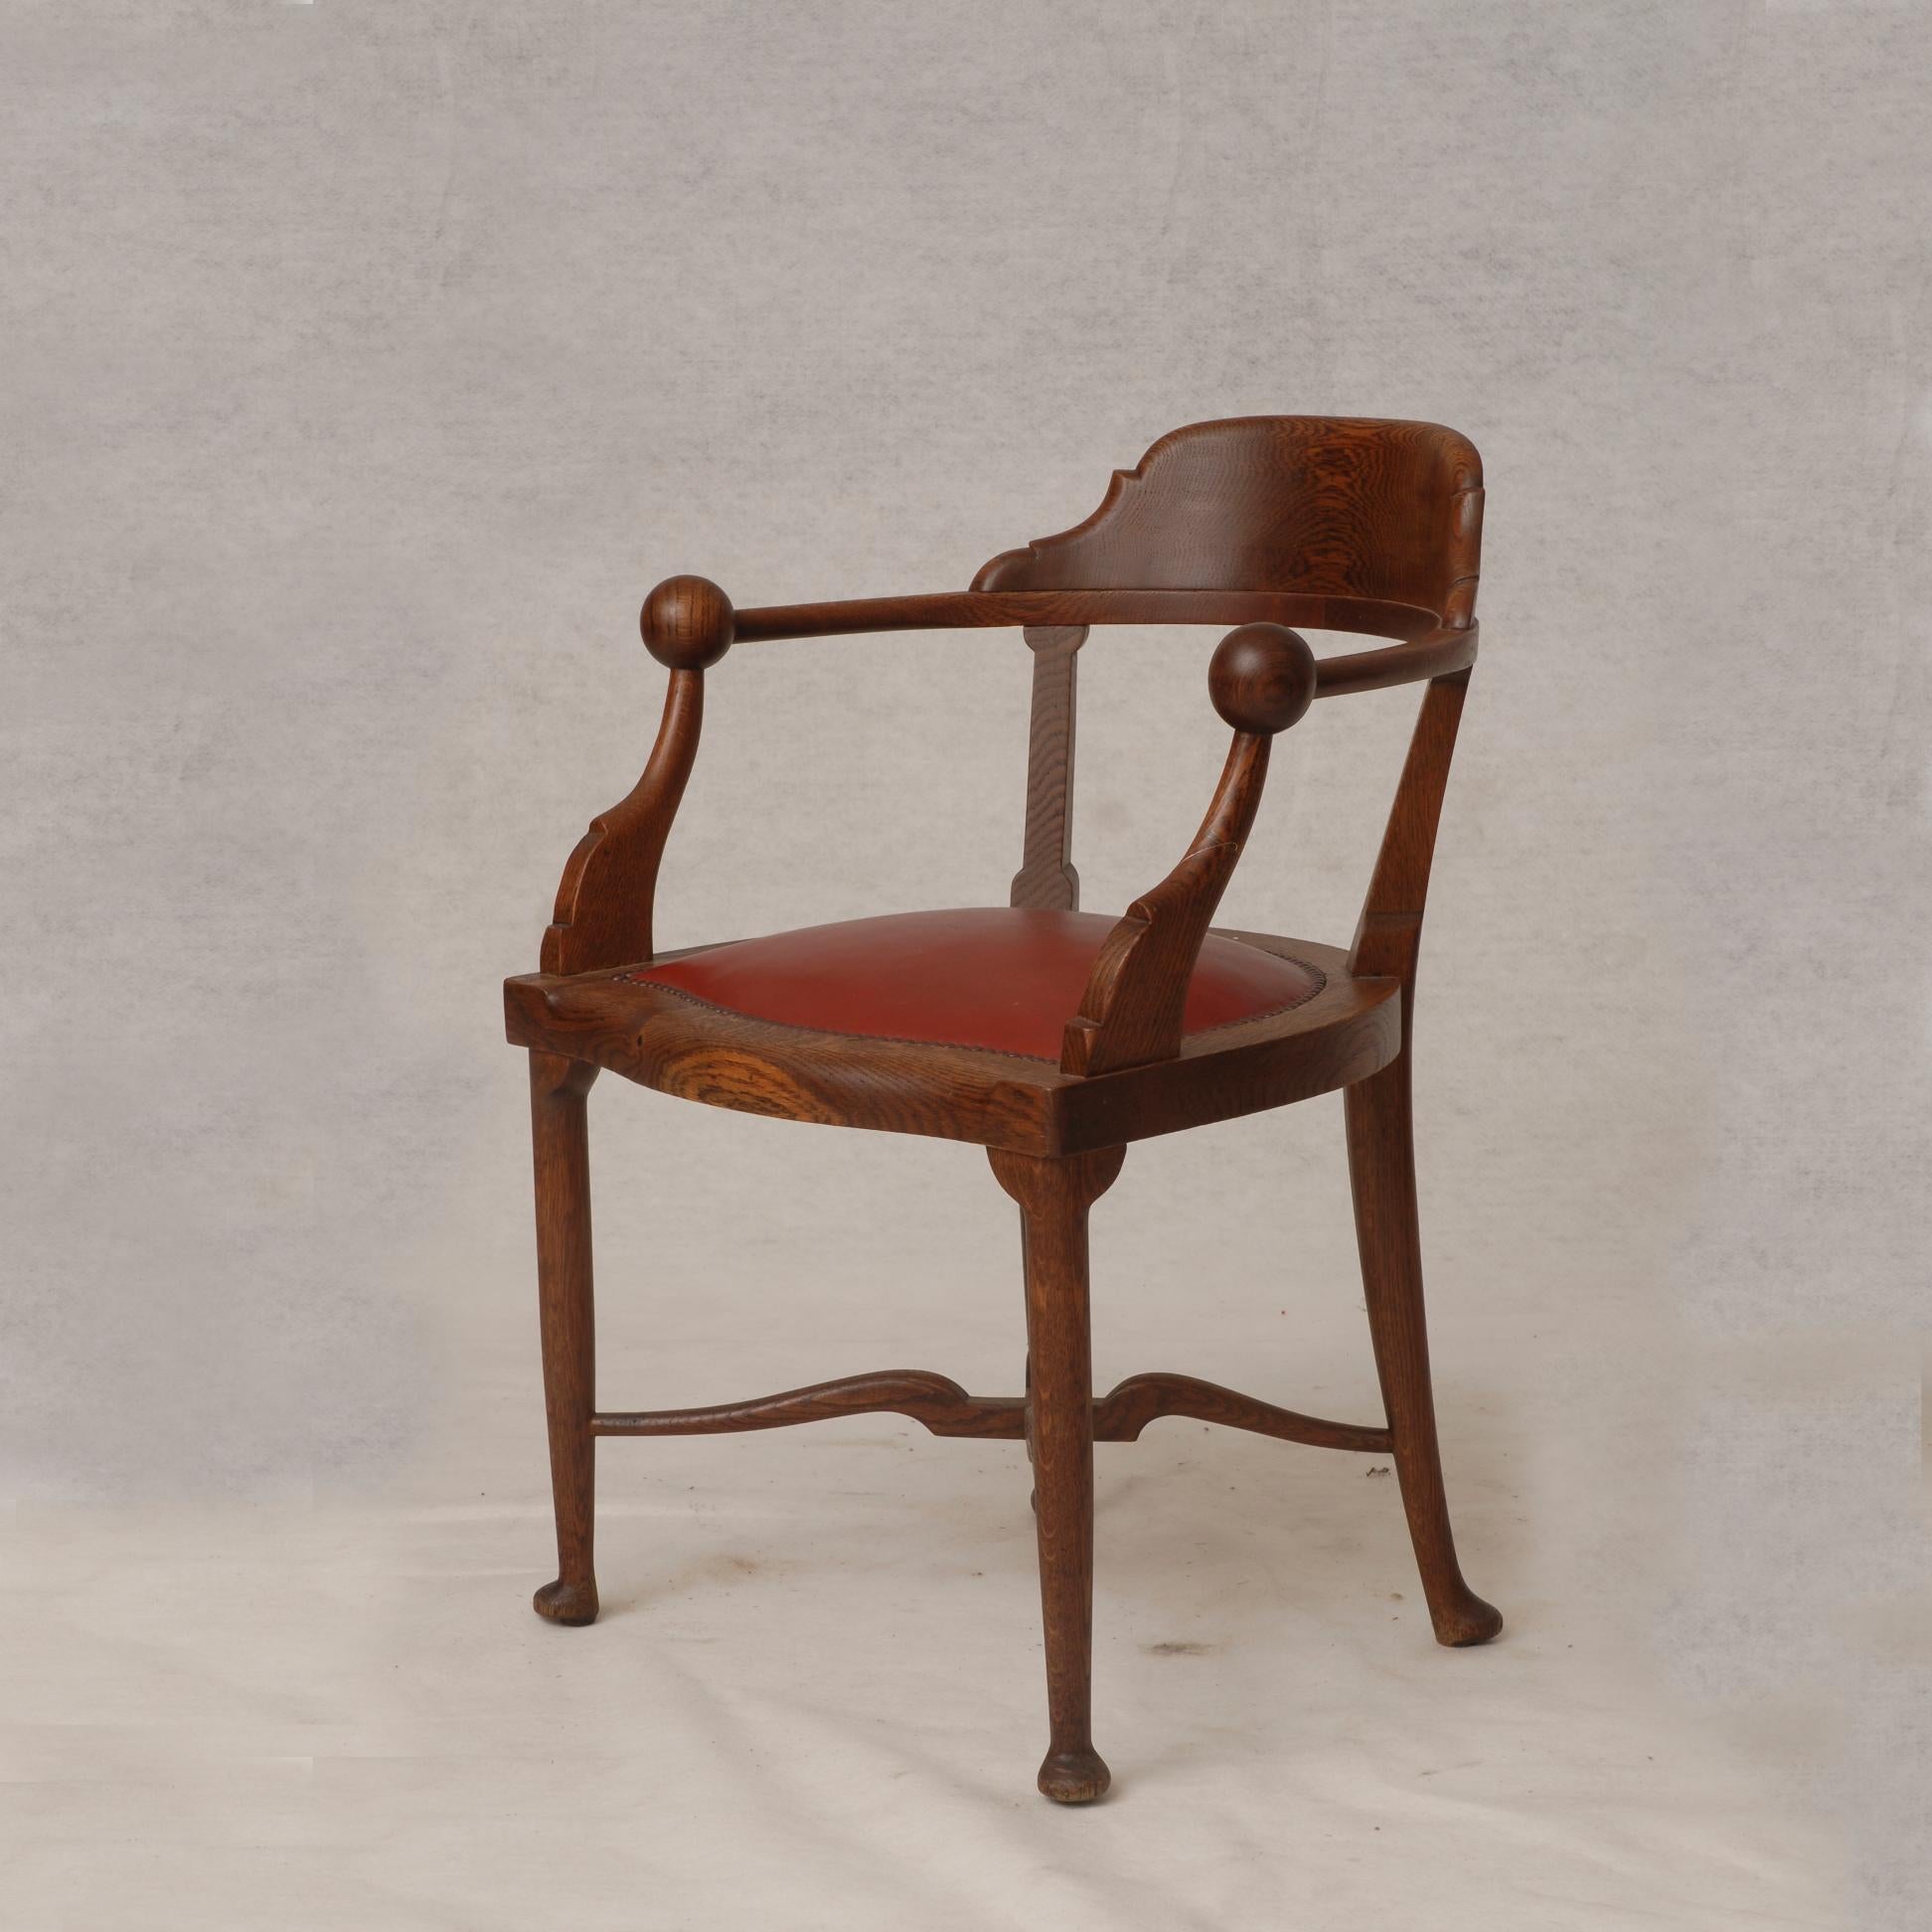 Other Iconic Karoly Lingel Solid Oak Two Spheres Armchair, Hungary, 1900s For Sale